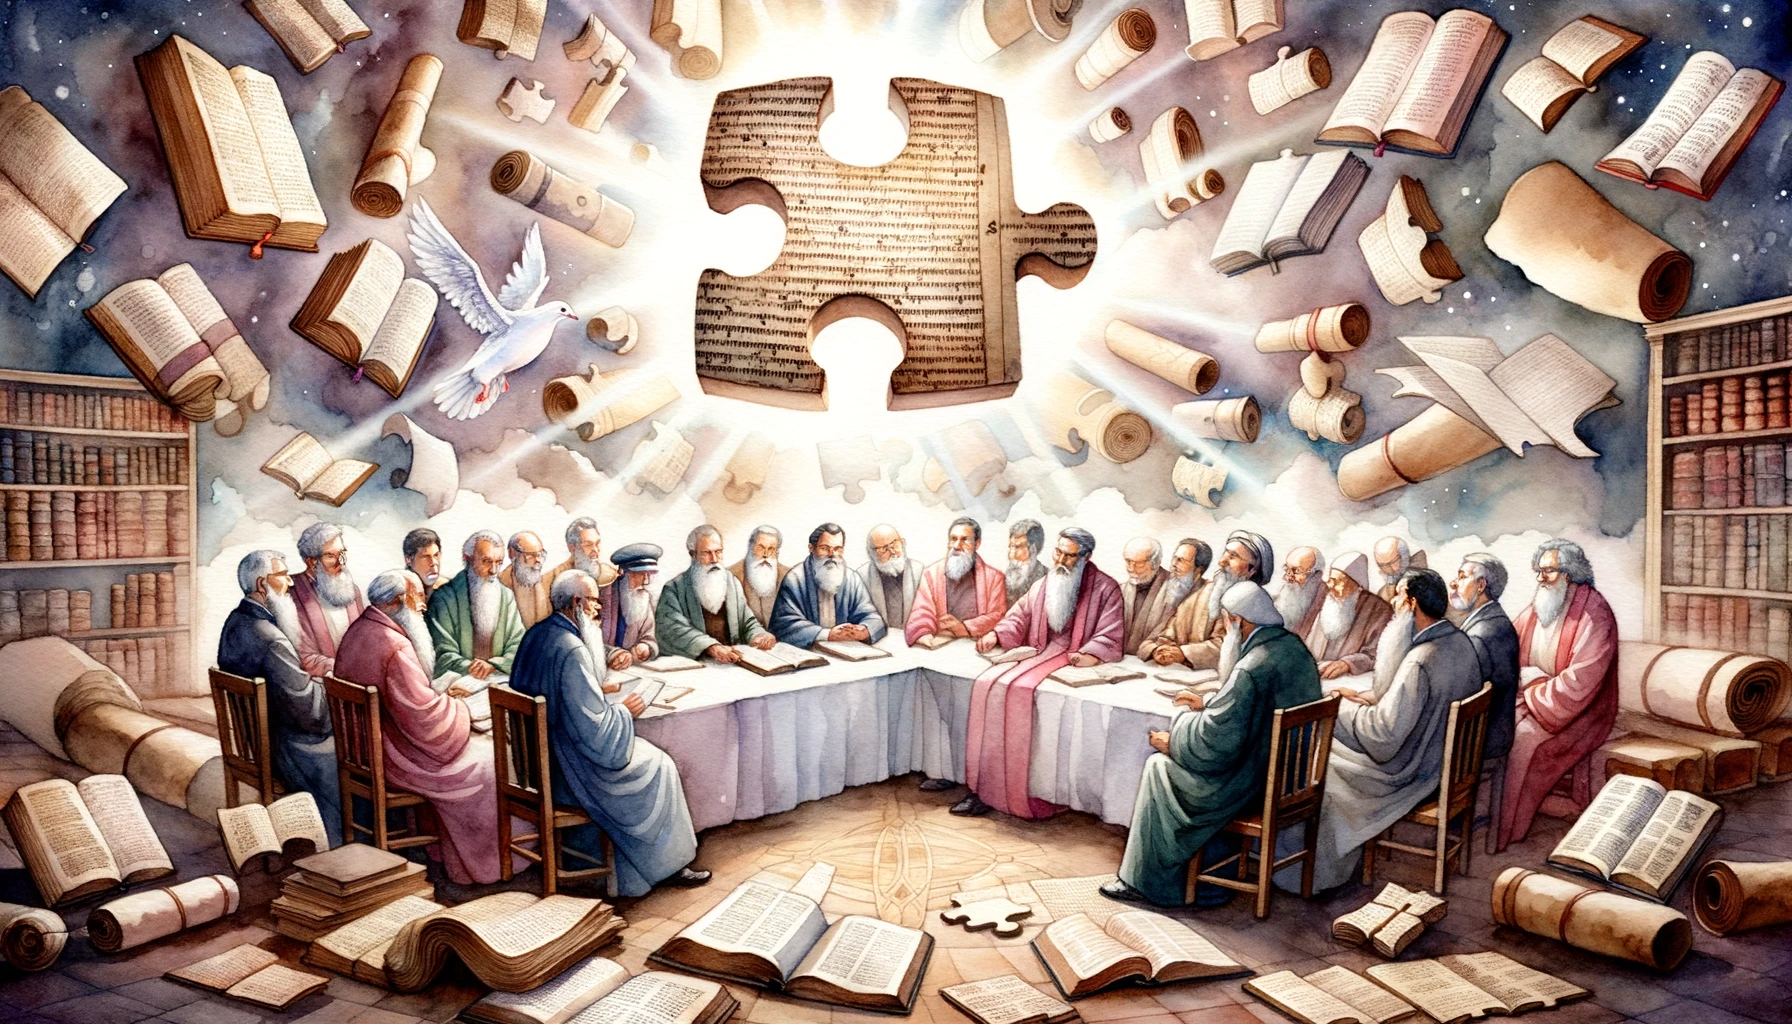 Biblical scholars and theologians engrossed in discussion about the synoptic problem, surrounded by ancient manuscripts.